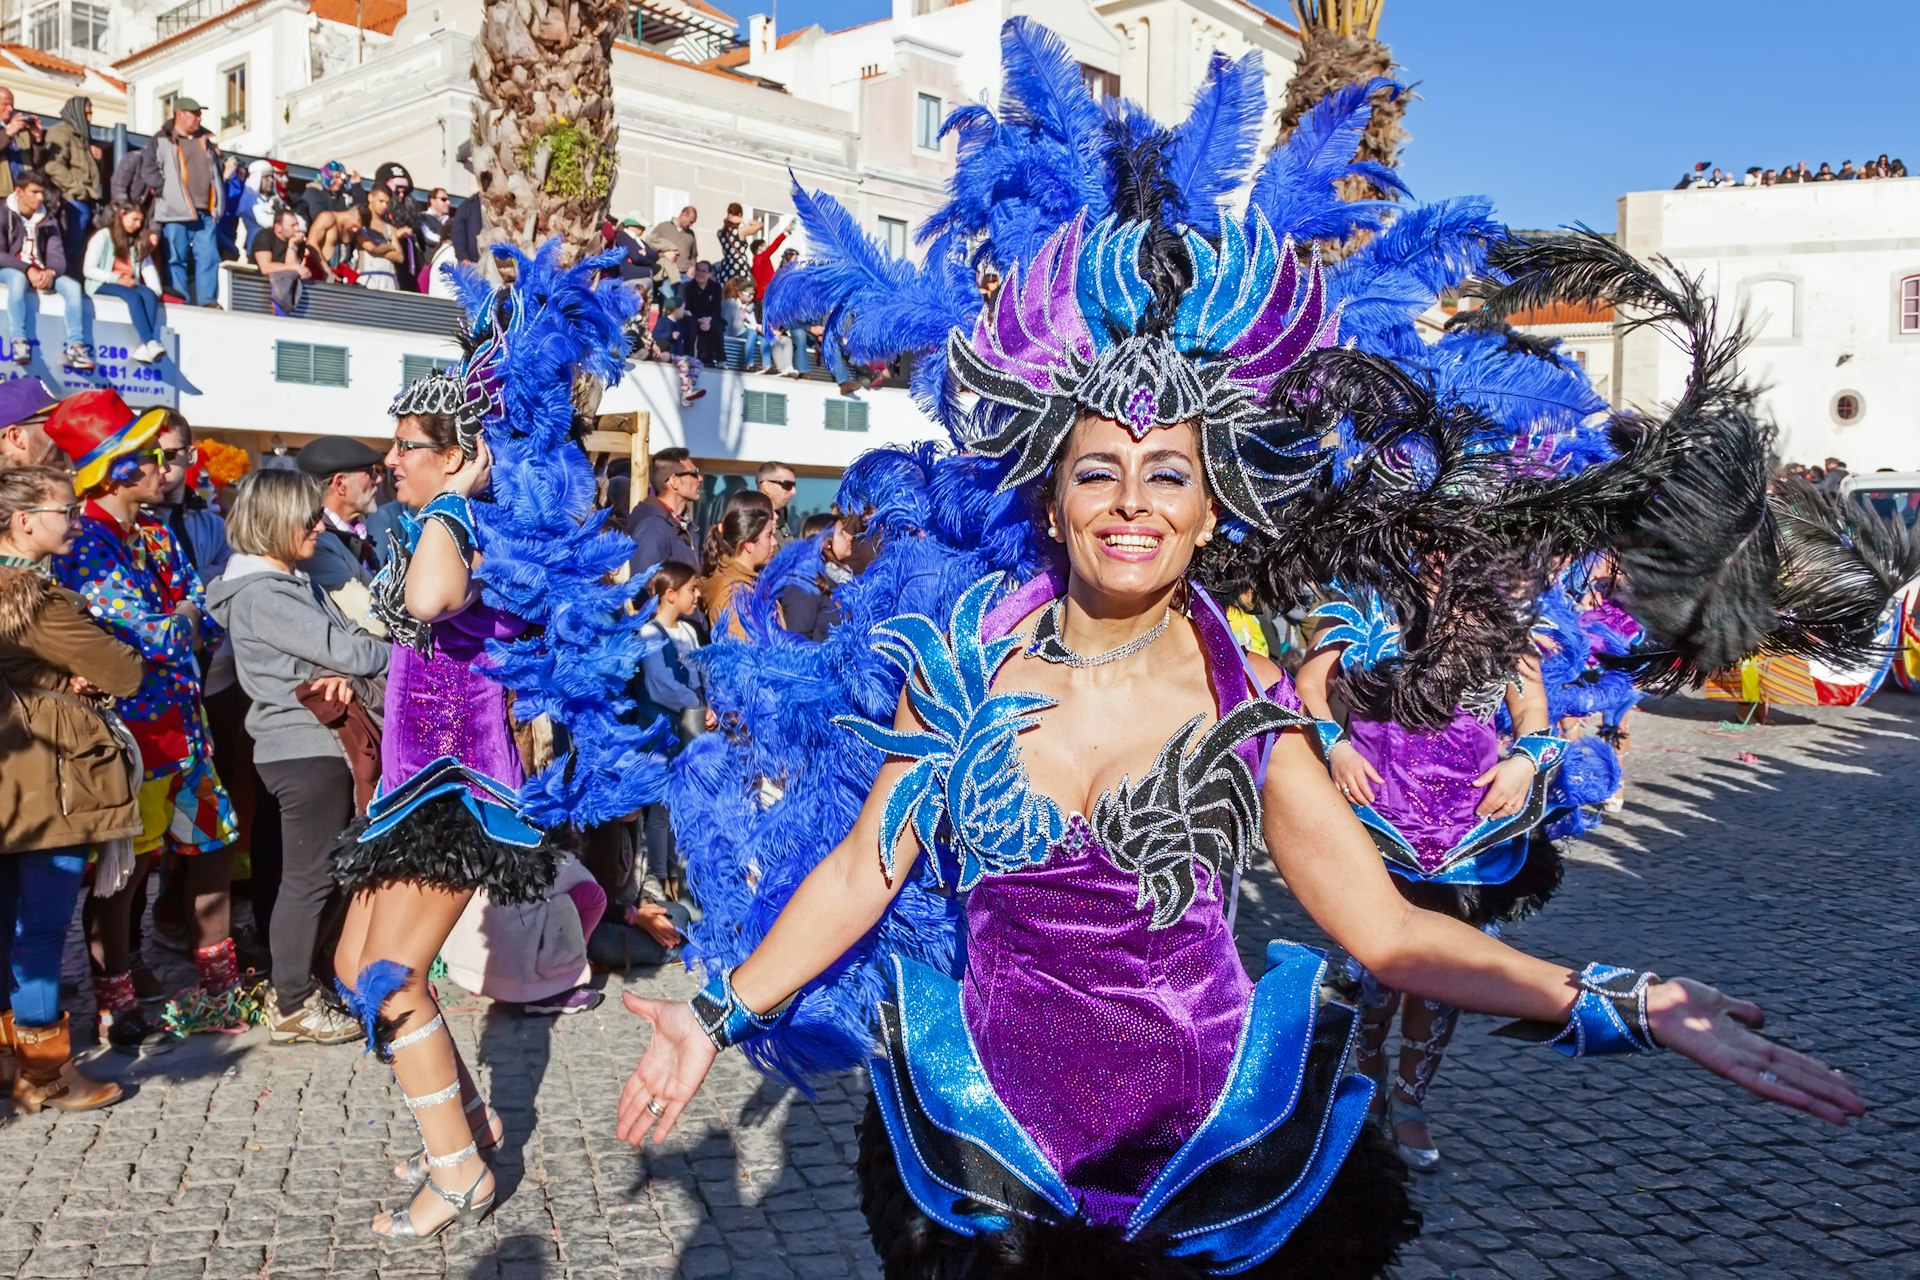 A smiling samba performer in blue-and-purple costume dances in a parade